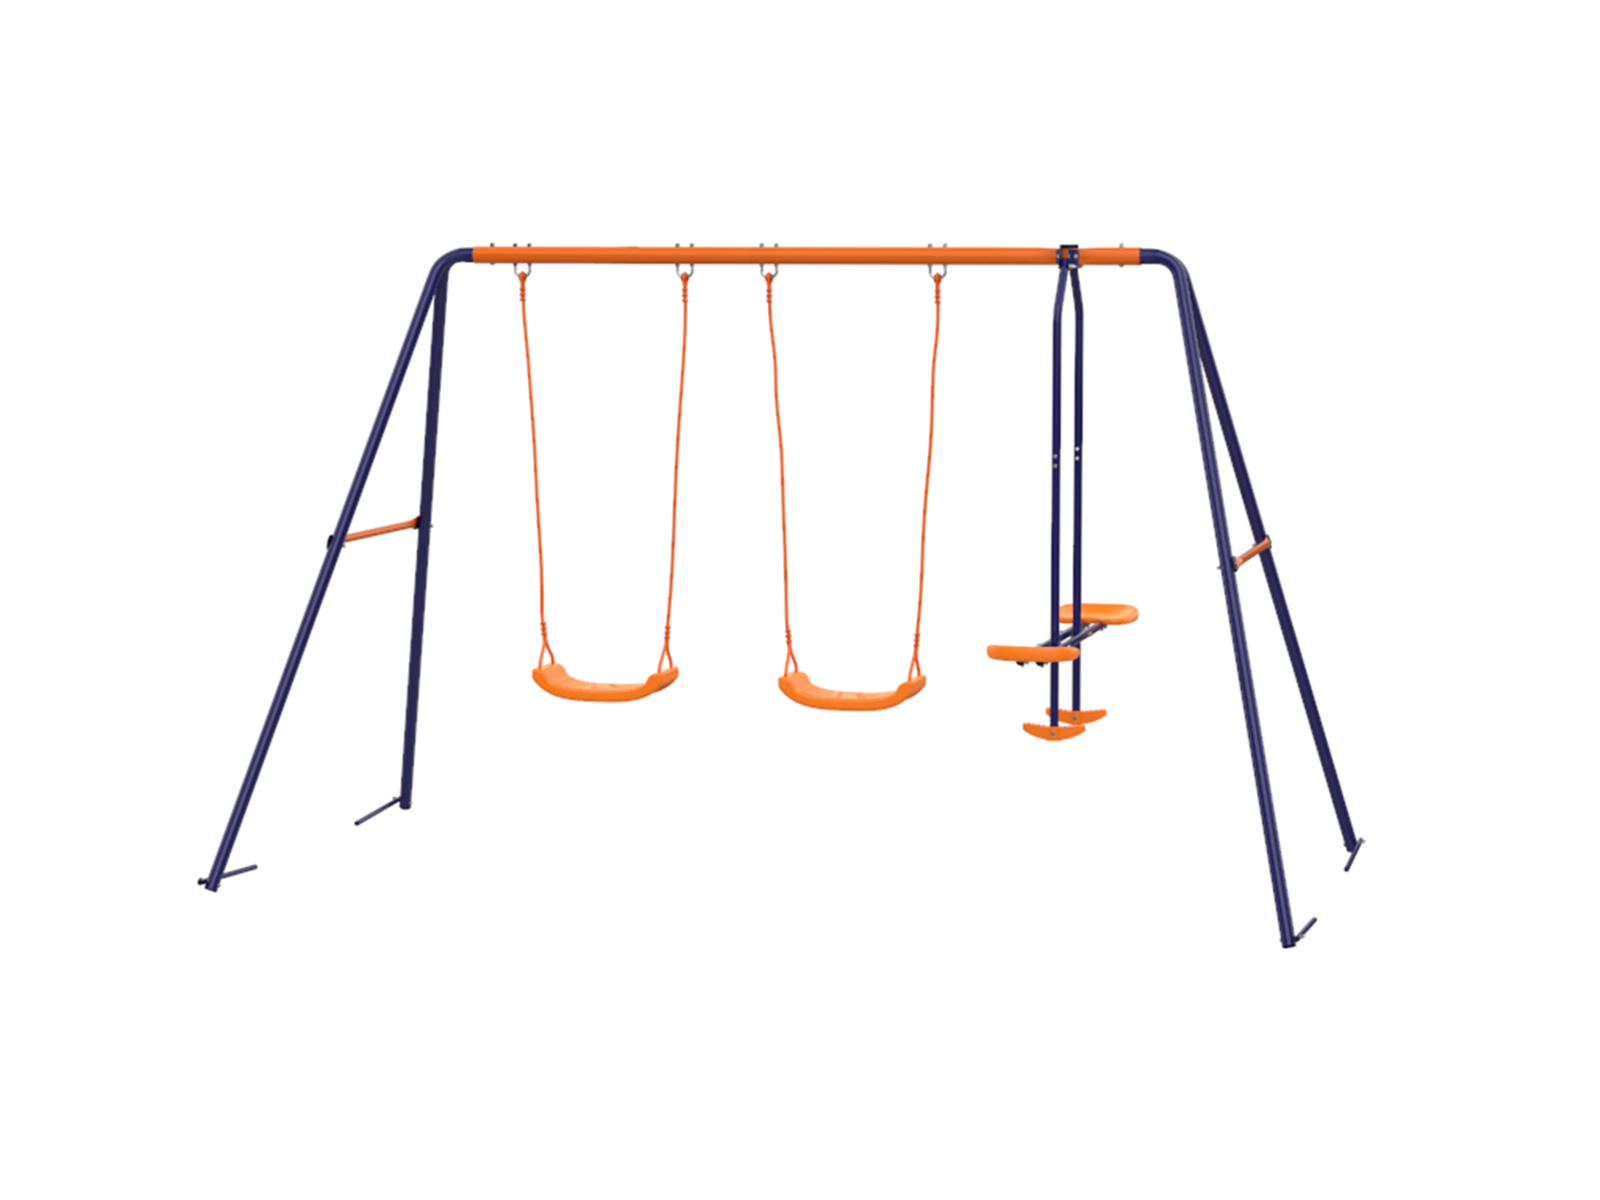 ZENSTYLE Double Metal Swing Set W/ 2 Saucer Swing Seats, 1 Seesaw for  Outdoor, Backyard - Kids Toddler Toy, All Weather Resistant